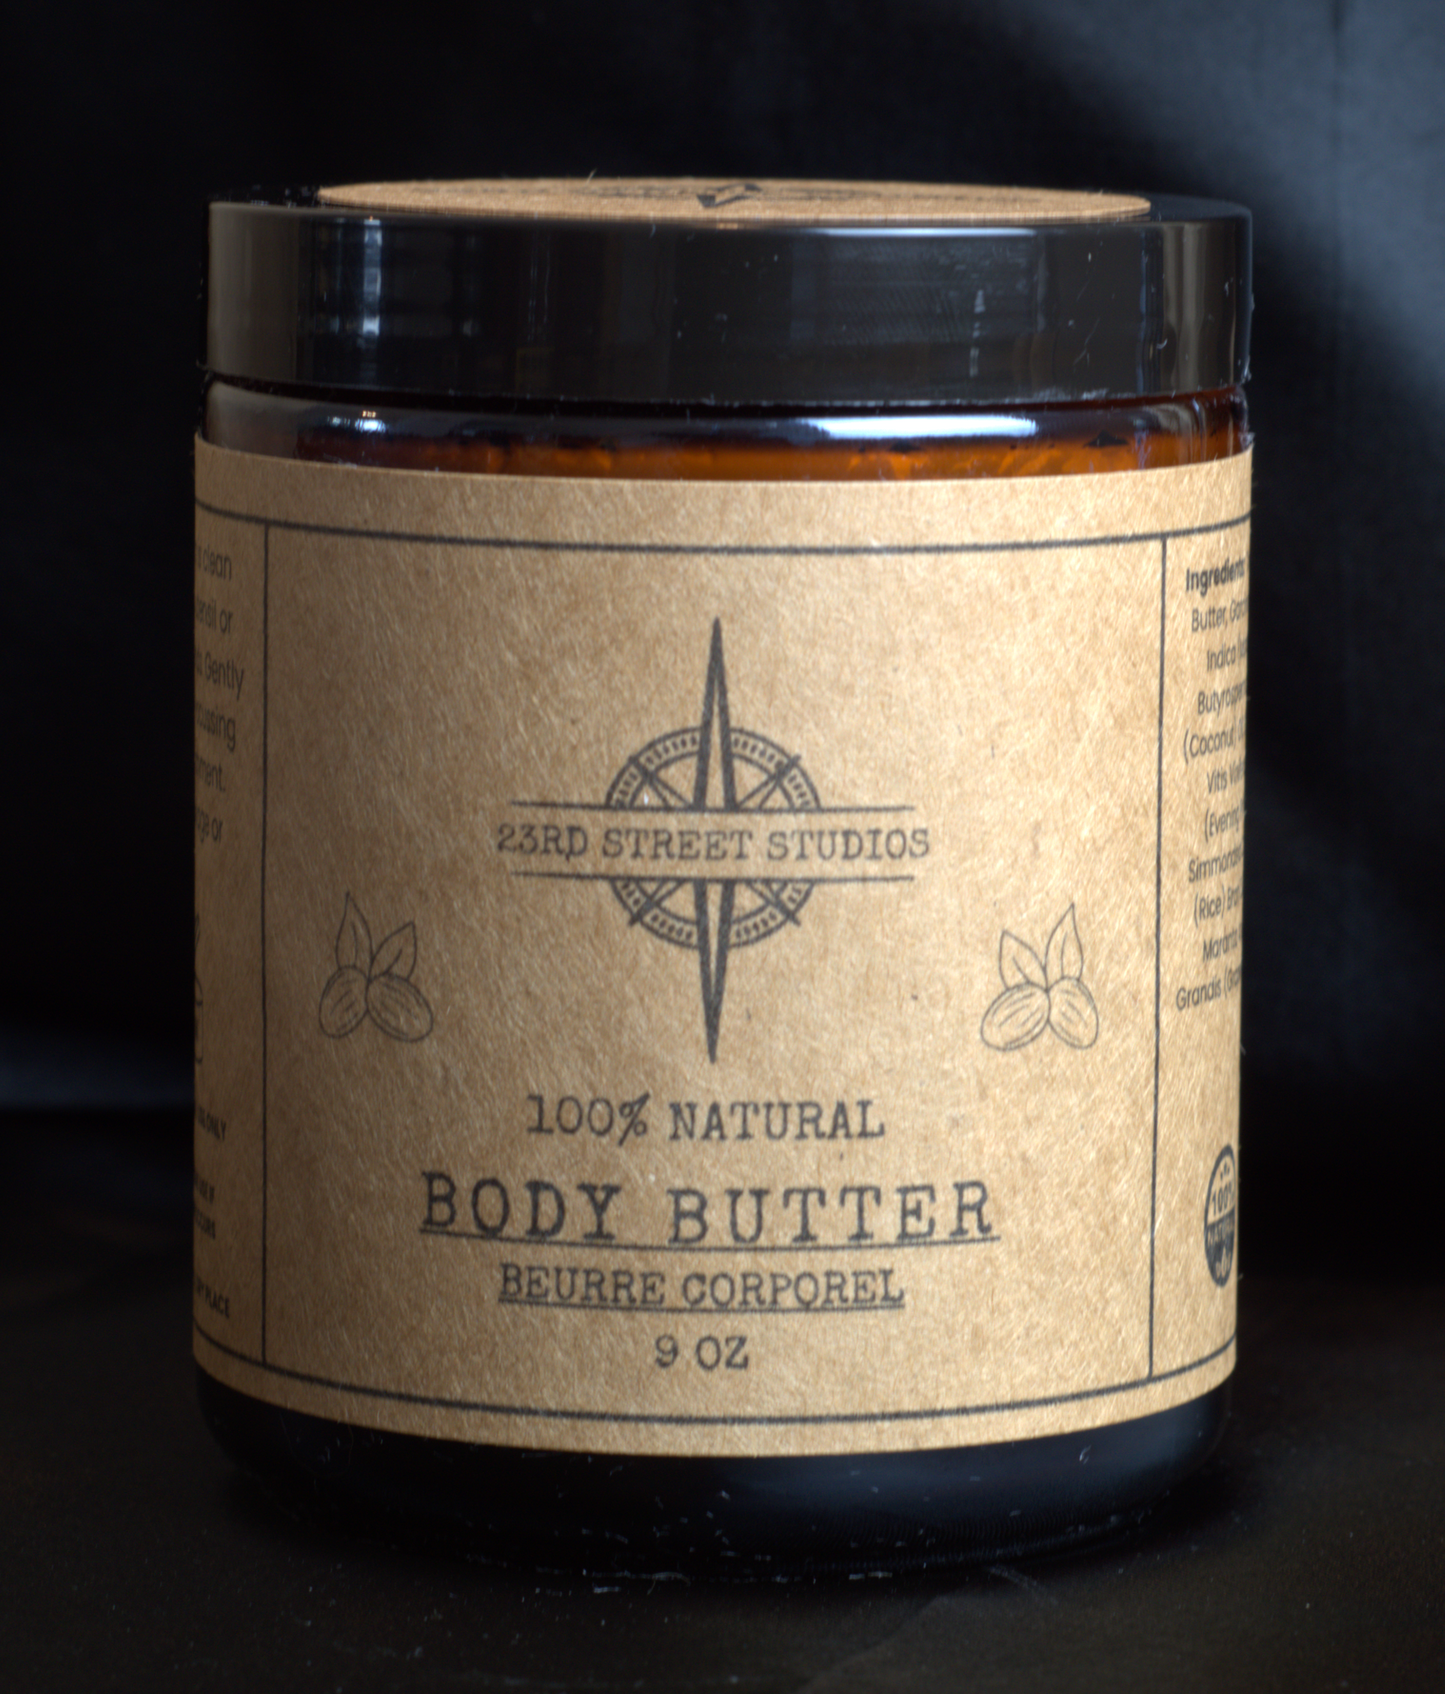 Body Butter (Unscented)